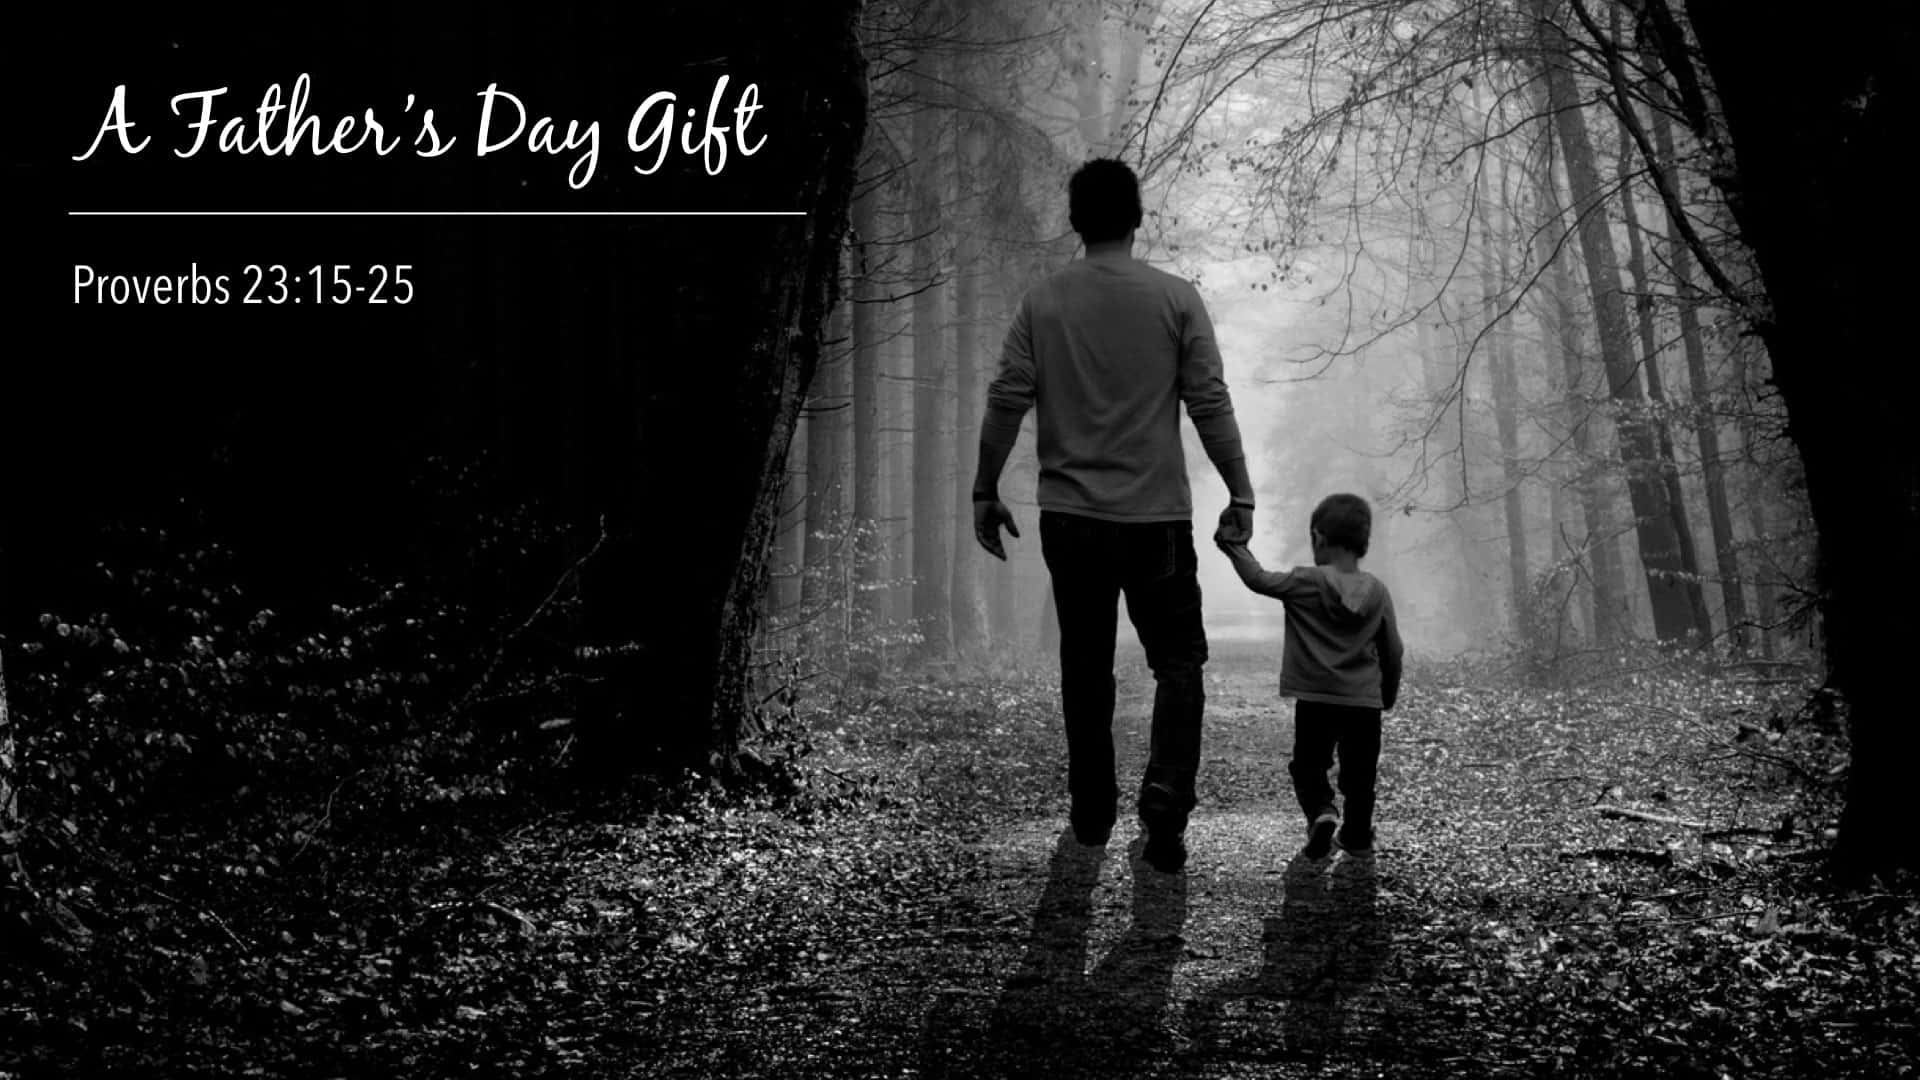 Make Father's Day Extra Special